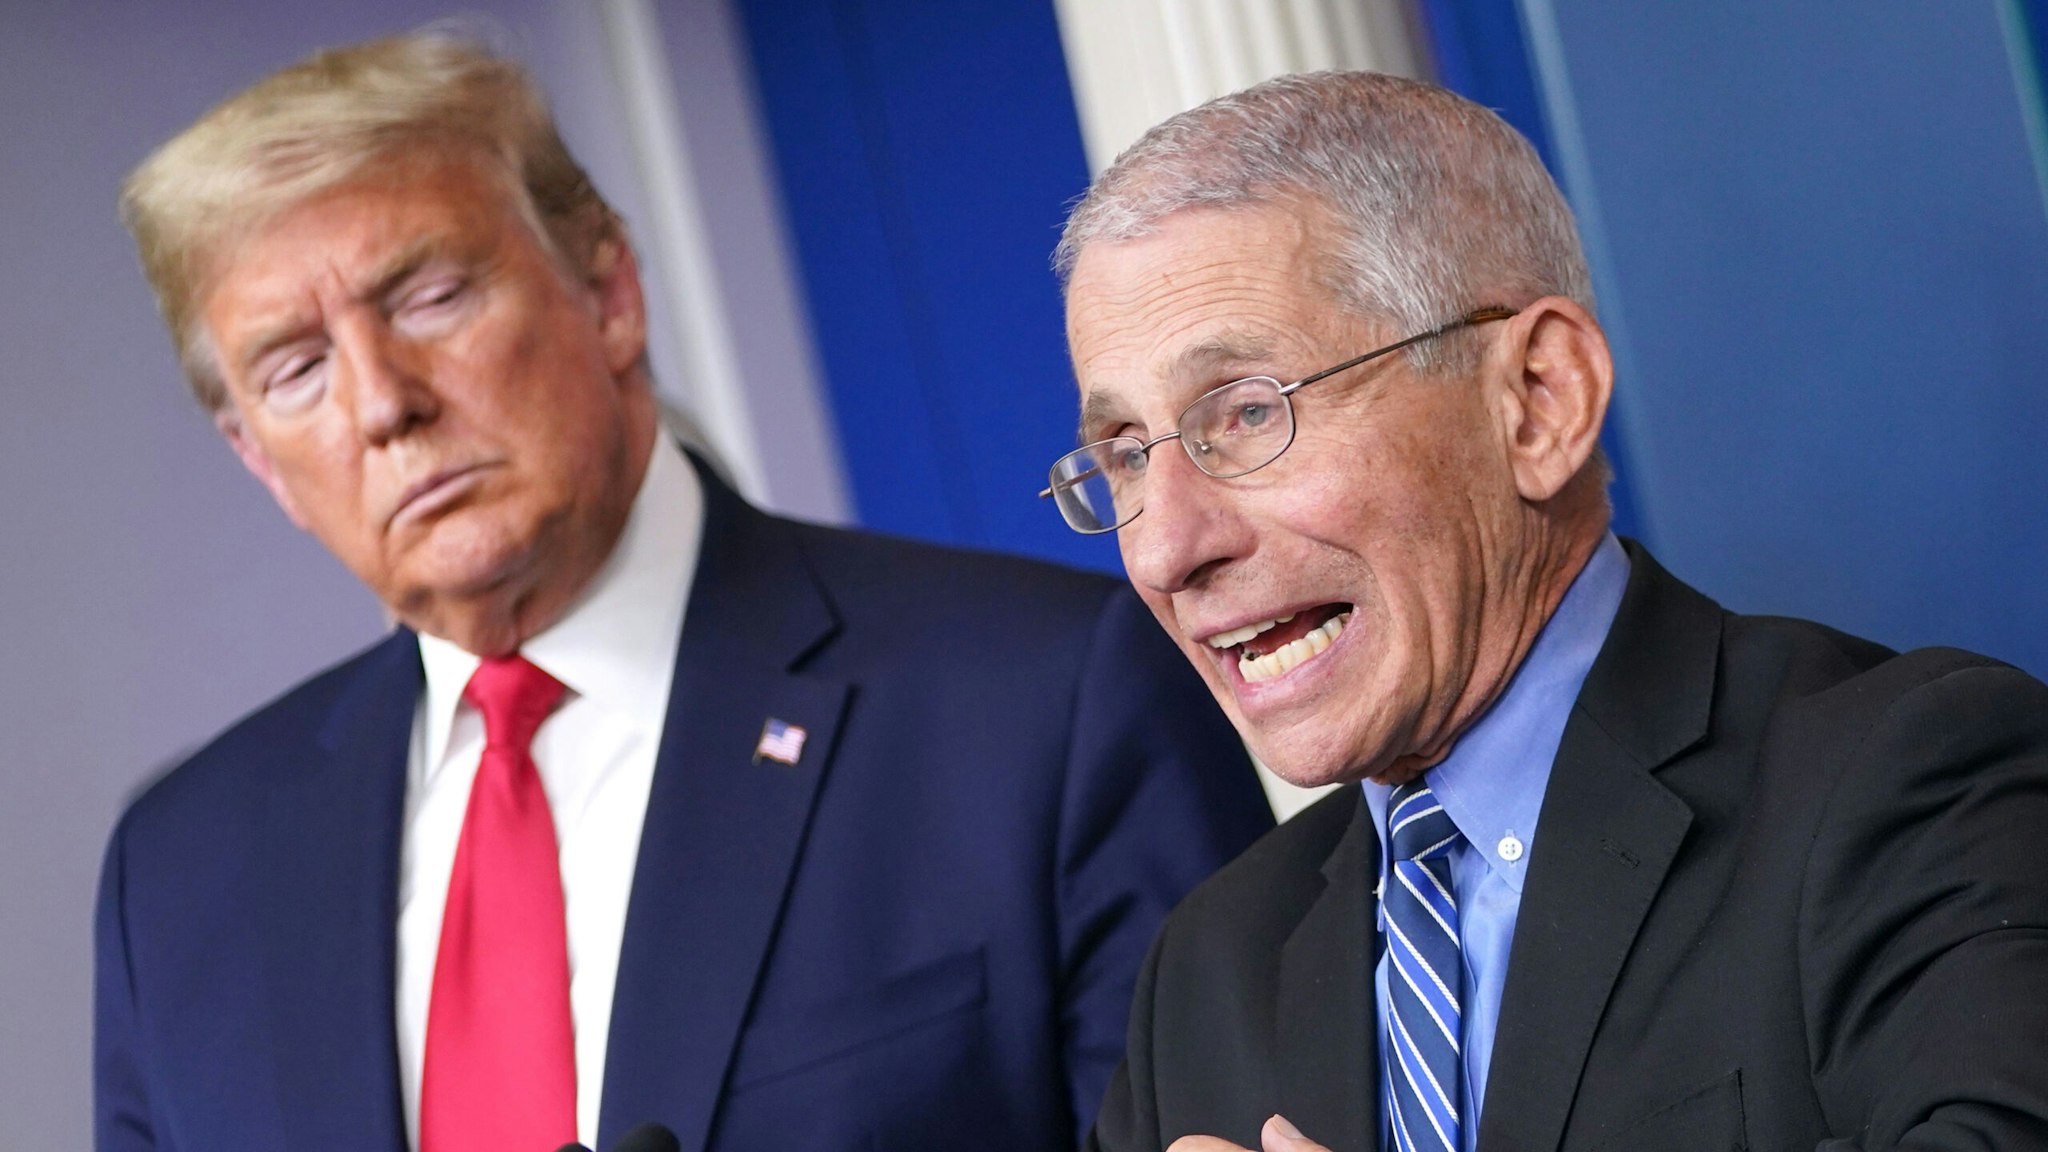 US President Donald Trump (L) listens as Director of the National Institute of Allergy and Infectious Diseases Anthony Fauci speaks during the daily briefing on the novel coronavirus, COVID-19, at the White House on March 24, 2020, in Washington, DC.